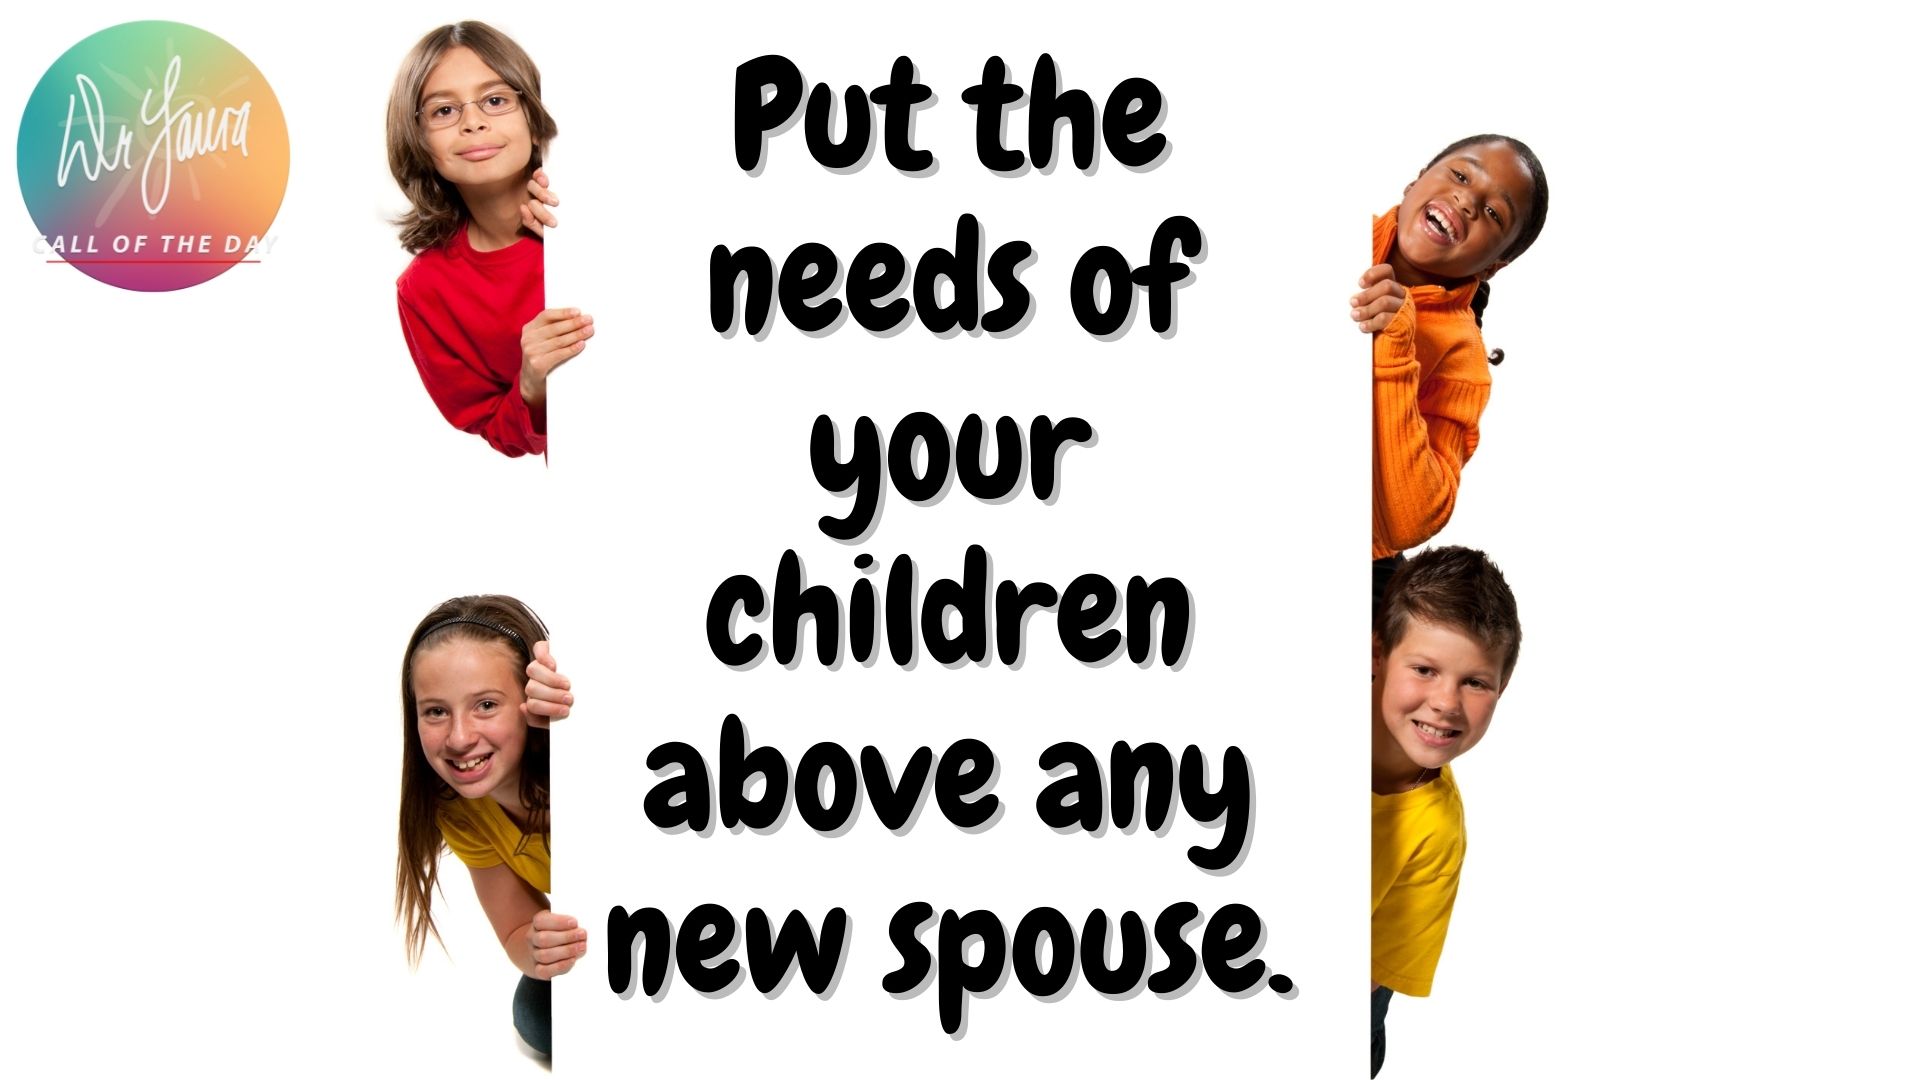 Call of the Day Podcast: Should You Prioritize Your Spouse or Child?